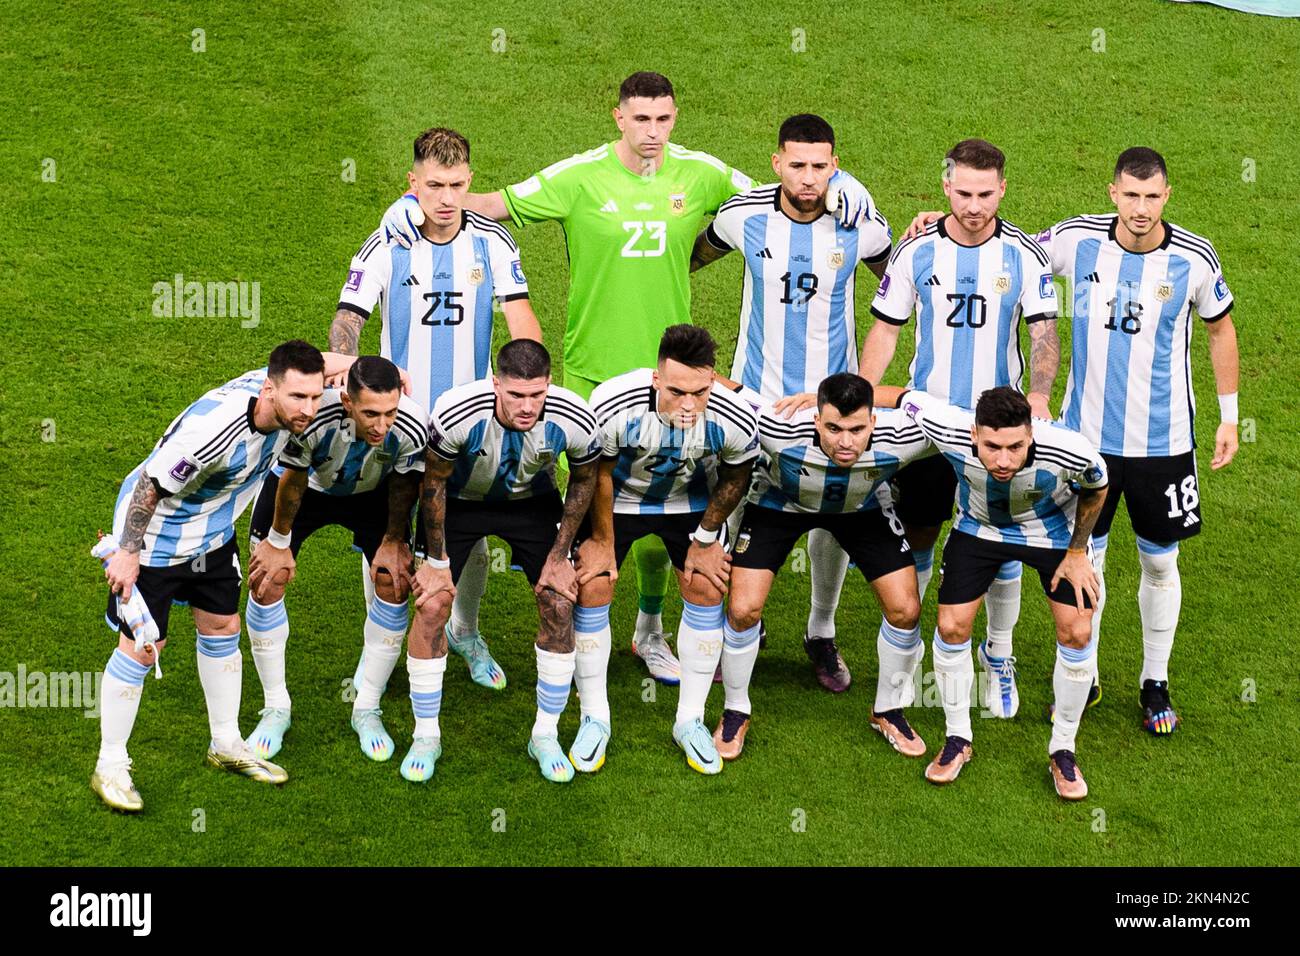 Lusail, Qatar. 14th Sep, 2022. Lusail, Qatar, Nov 26th 2022: Argentina team before the match between Argentina vs Mexico, valid for the group stage of the World Cup, held at the Lusail National Stadium in Lusail, Qatar. (Marcio Machado/SPP) Credit: SPP Sport Press Photo. /Alamy Live News Stock Photo